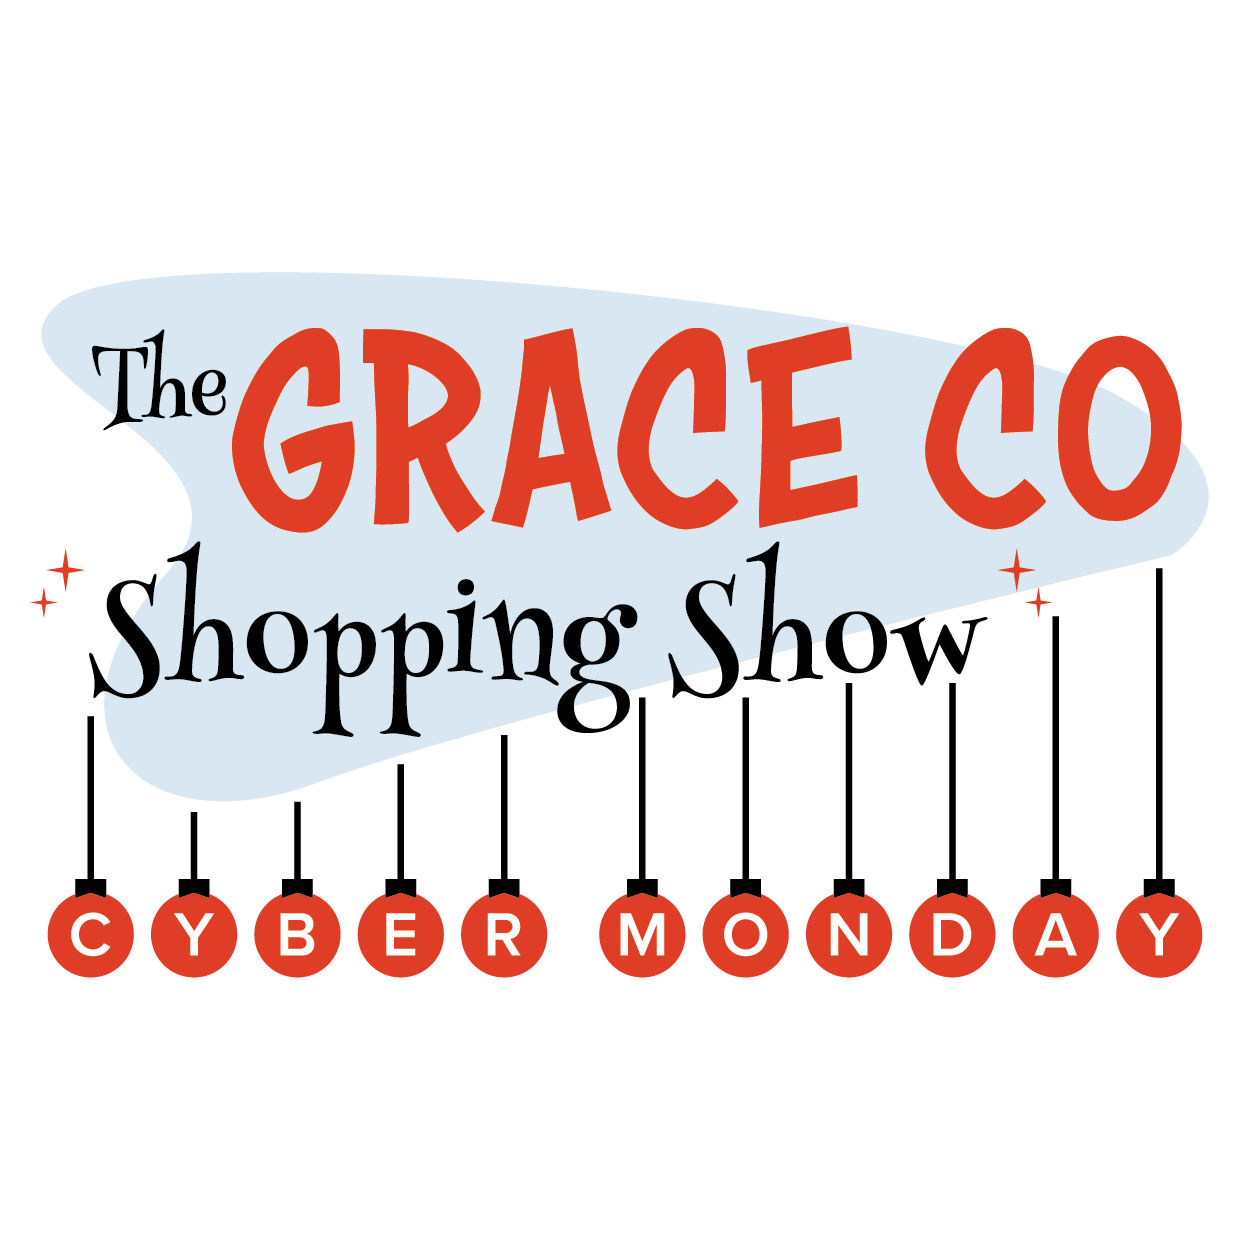 The Grace Co Shopping Show